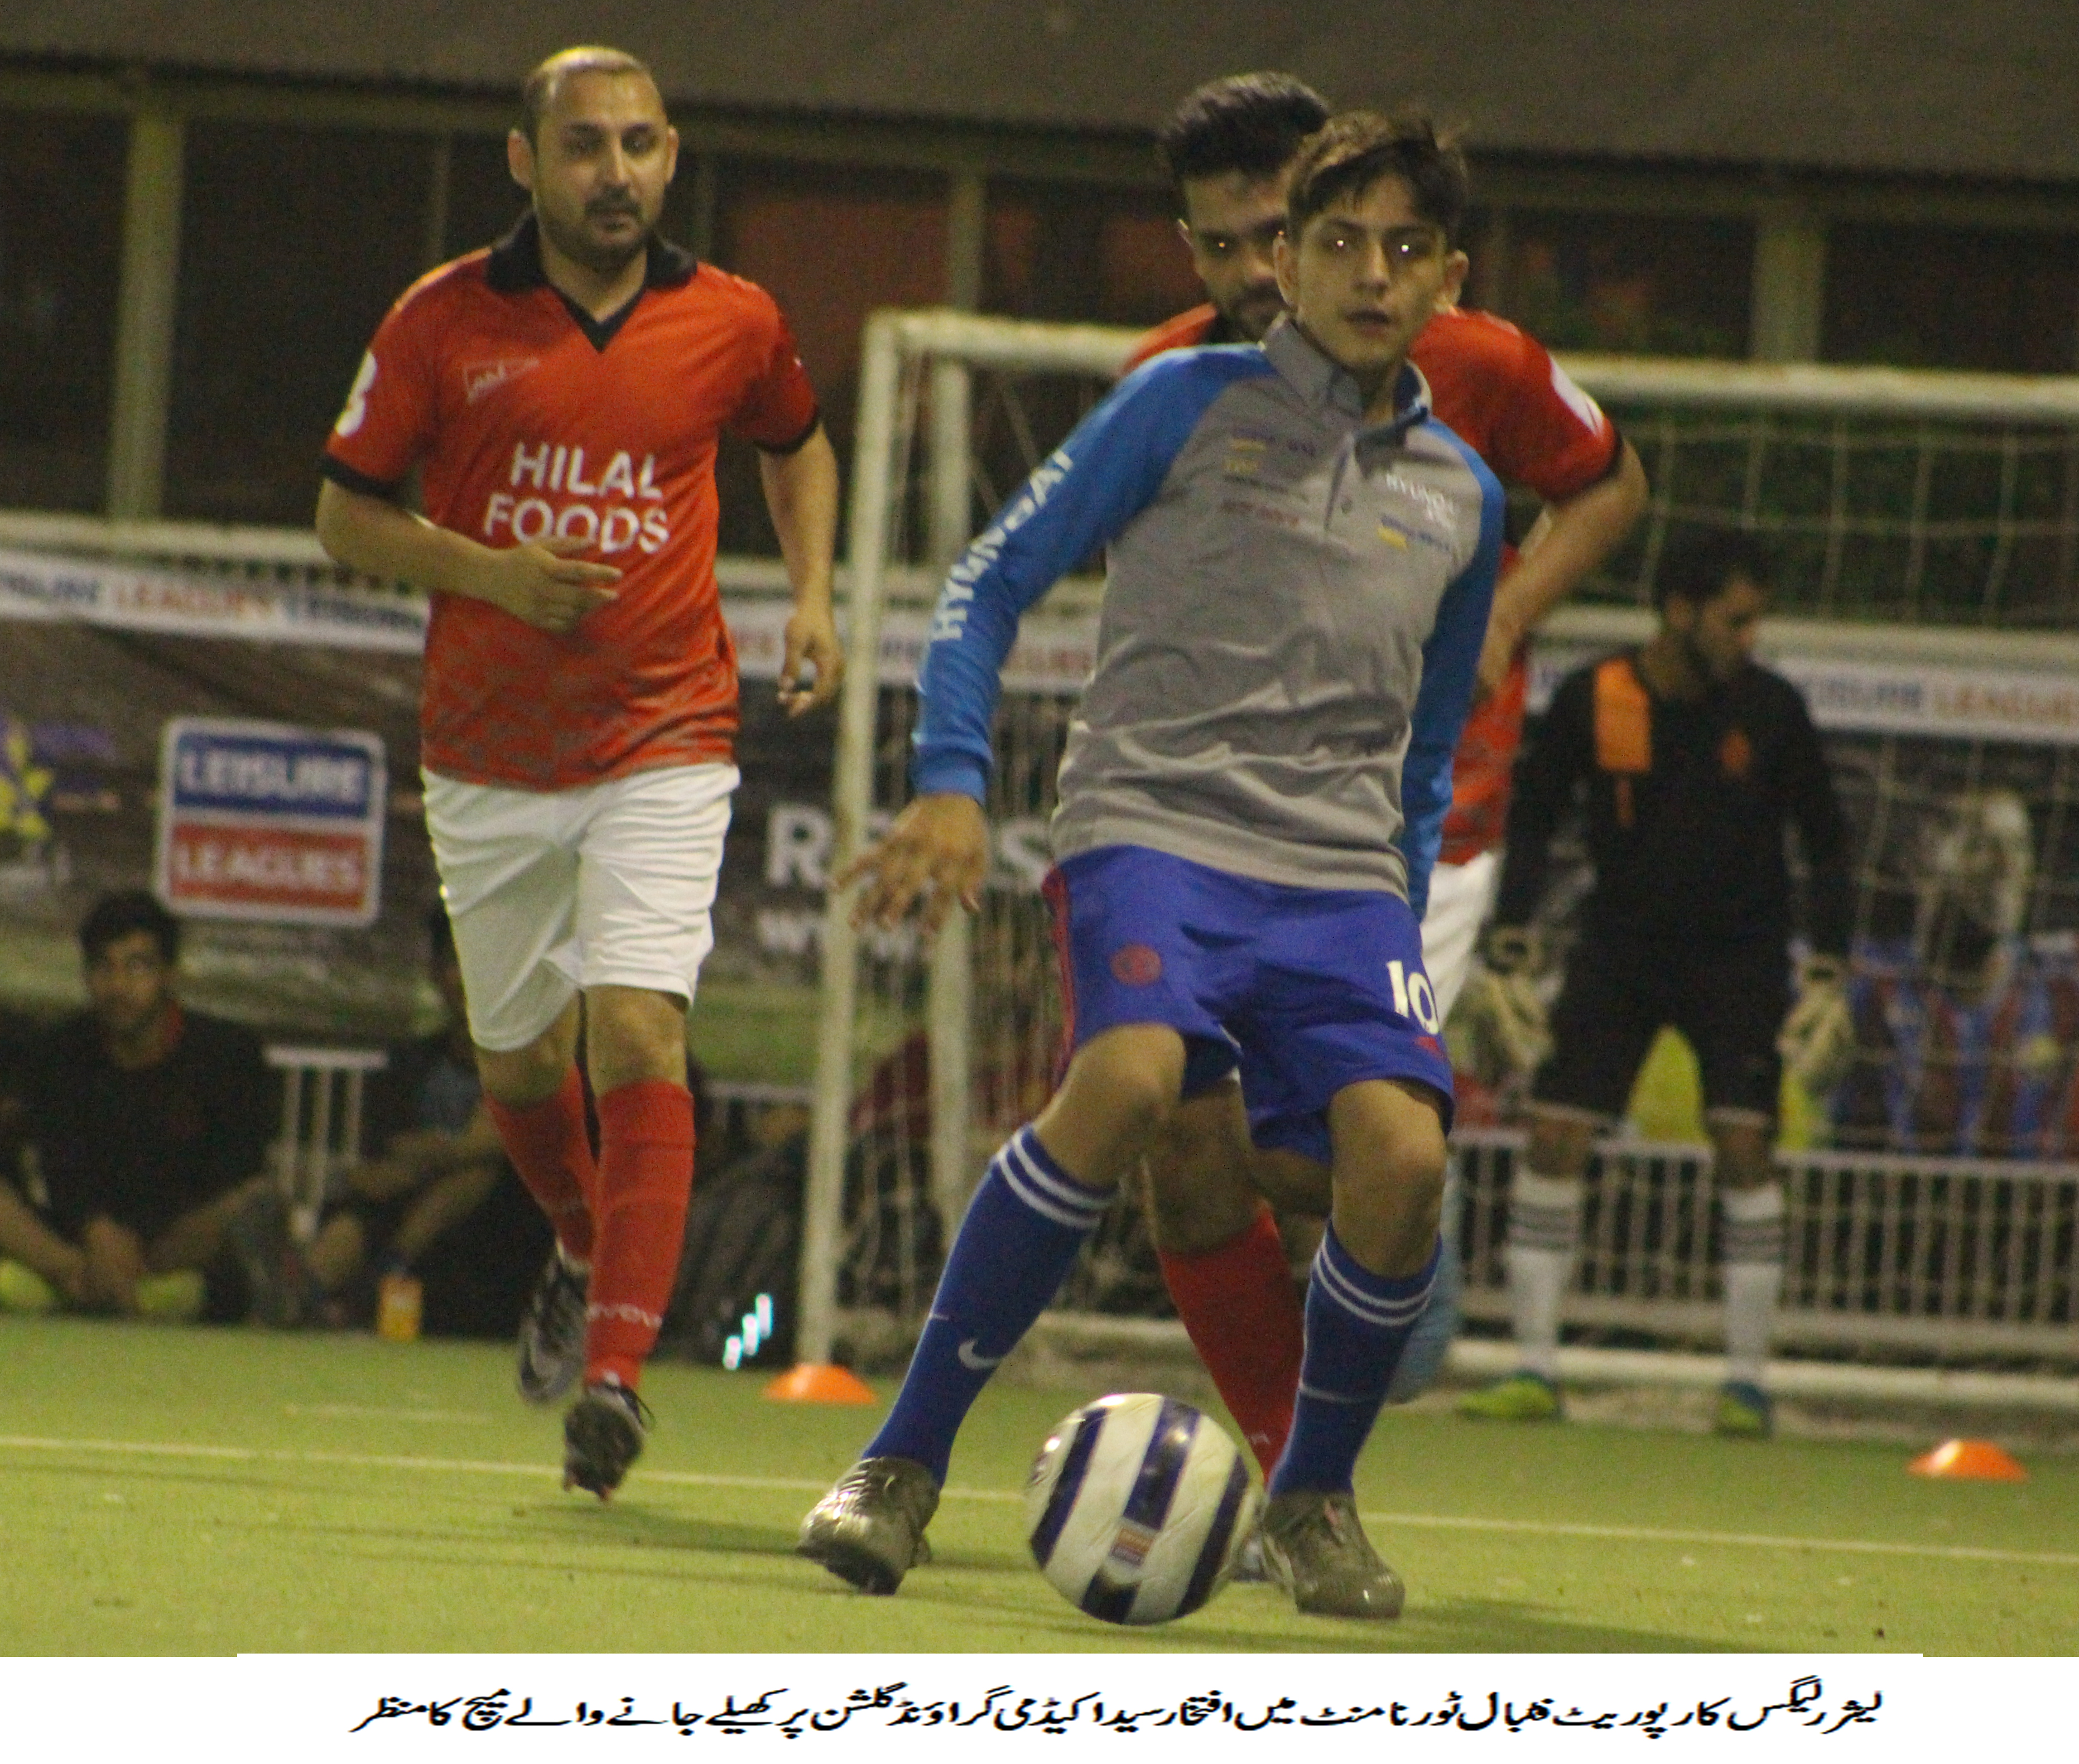 HXL thrashes Hilal Foods on opening day of   Leisure Leagues Corporate League